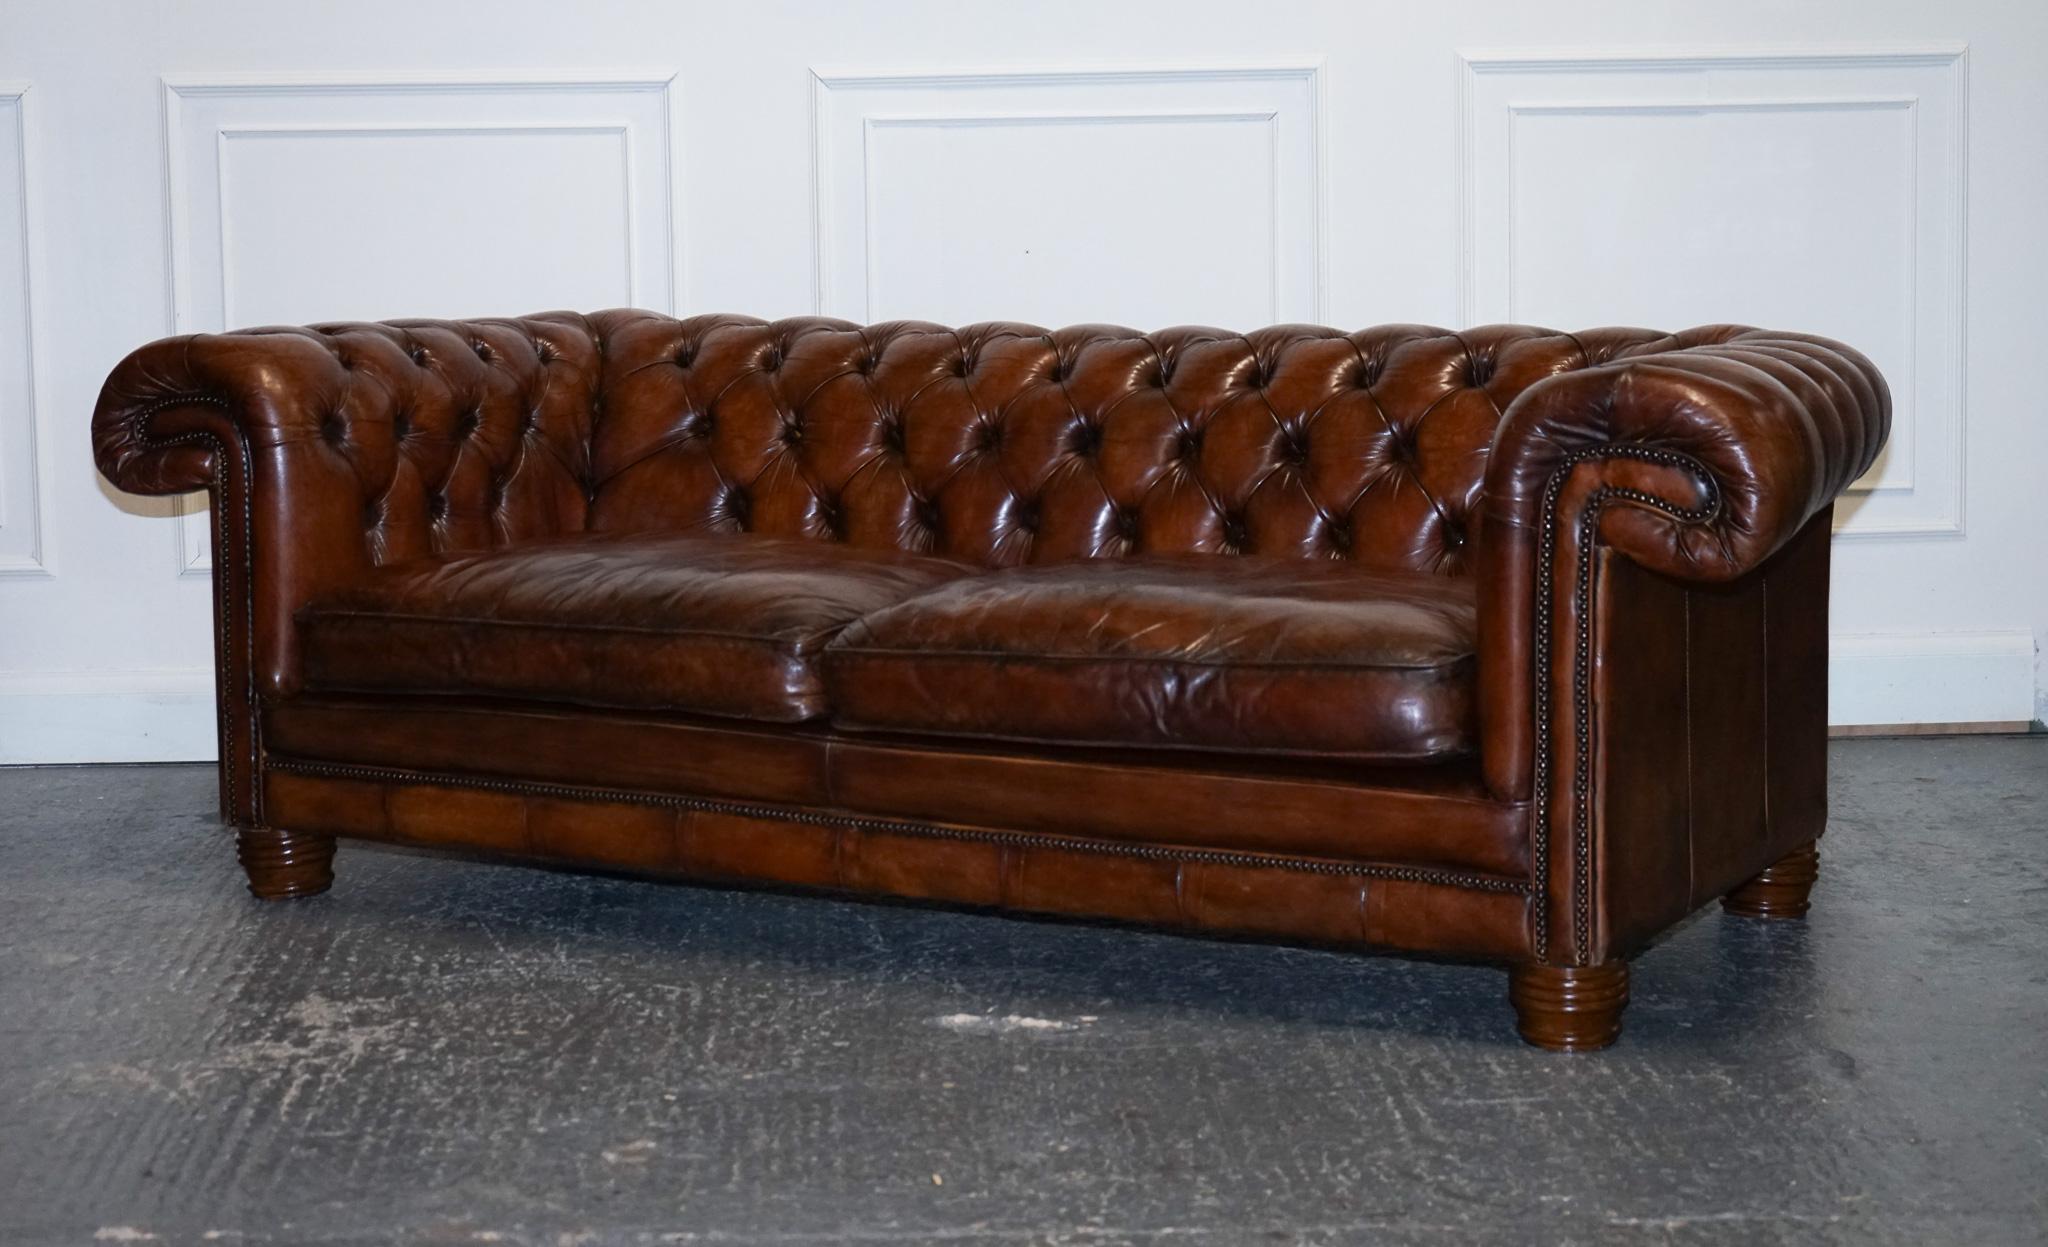 
We are delighted to offer for sale this Gorgeous Hand Dyed Restored Whiskey Brown Leather Chesterfield Club Sofa.

A beautifully well-made and solid Chesterfield sofa. On the bottom back it seems that there was some sort of badge, but we are not